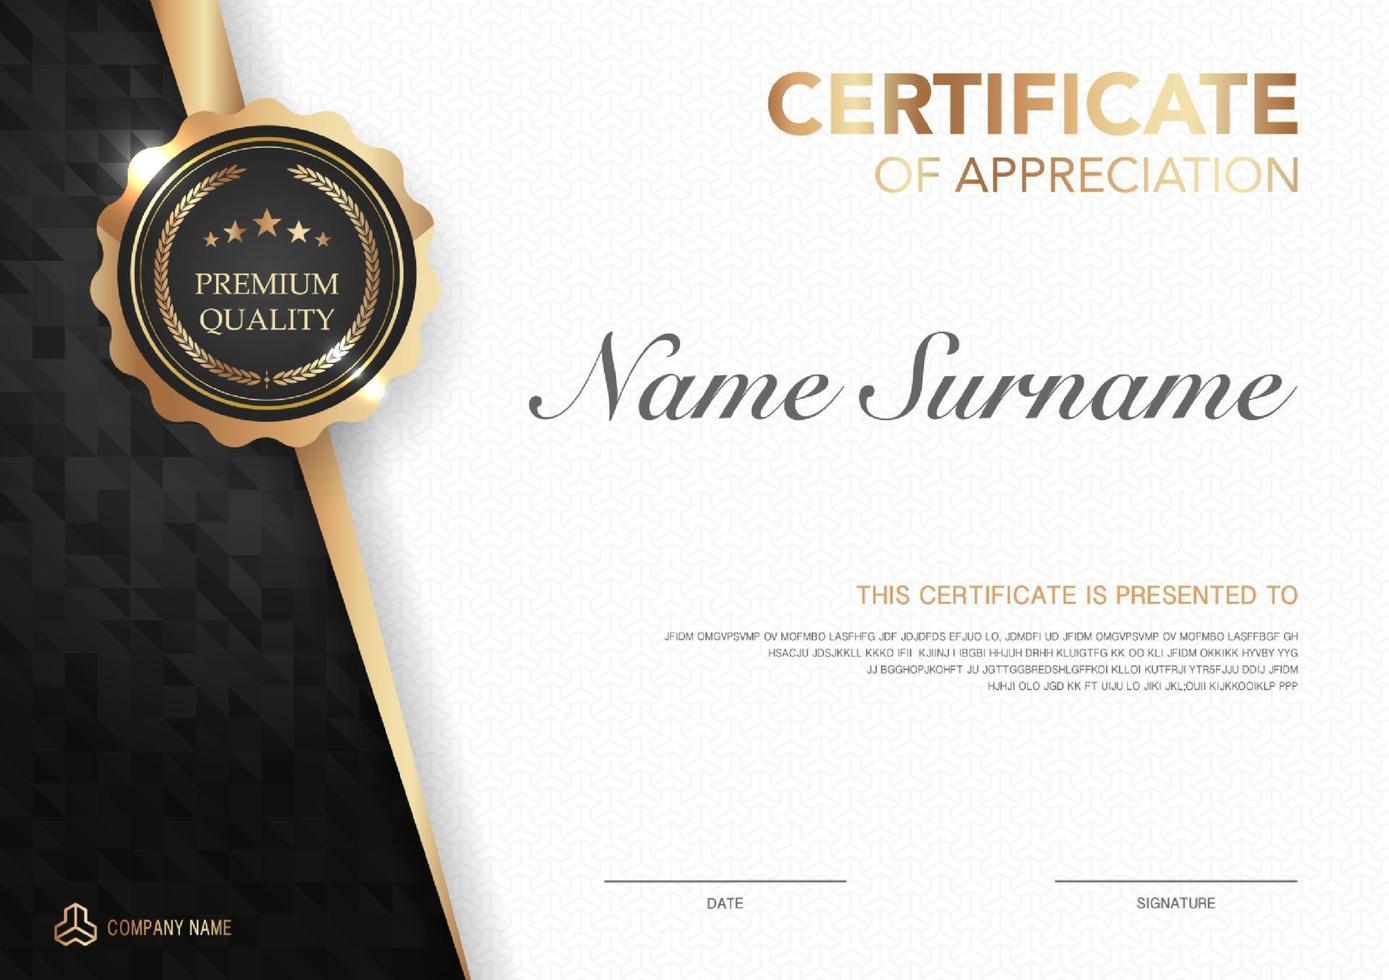 Certificate template black and gold luxury style image. Diploma of geometric modern design. eps10 vector. vector